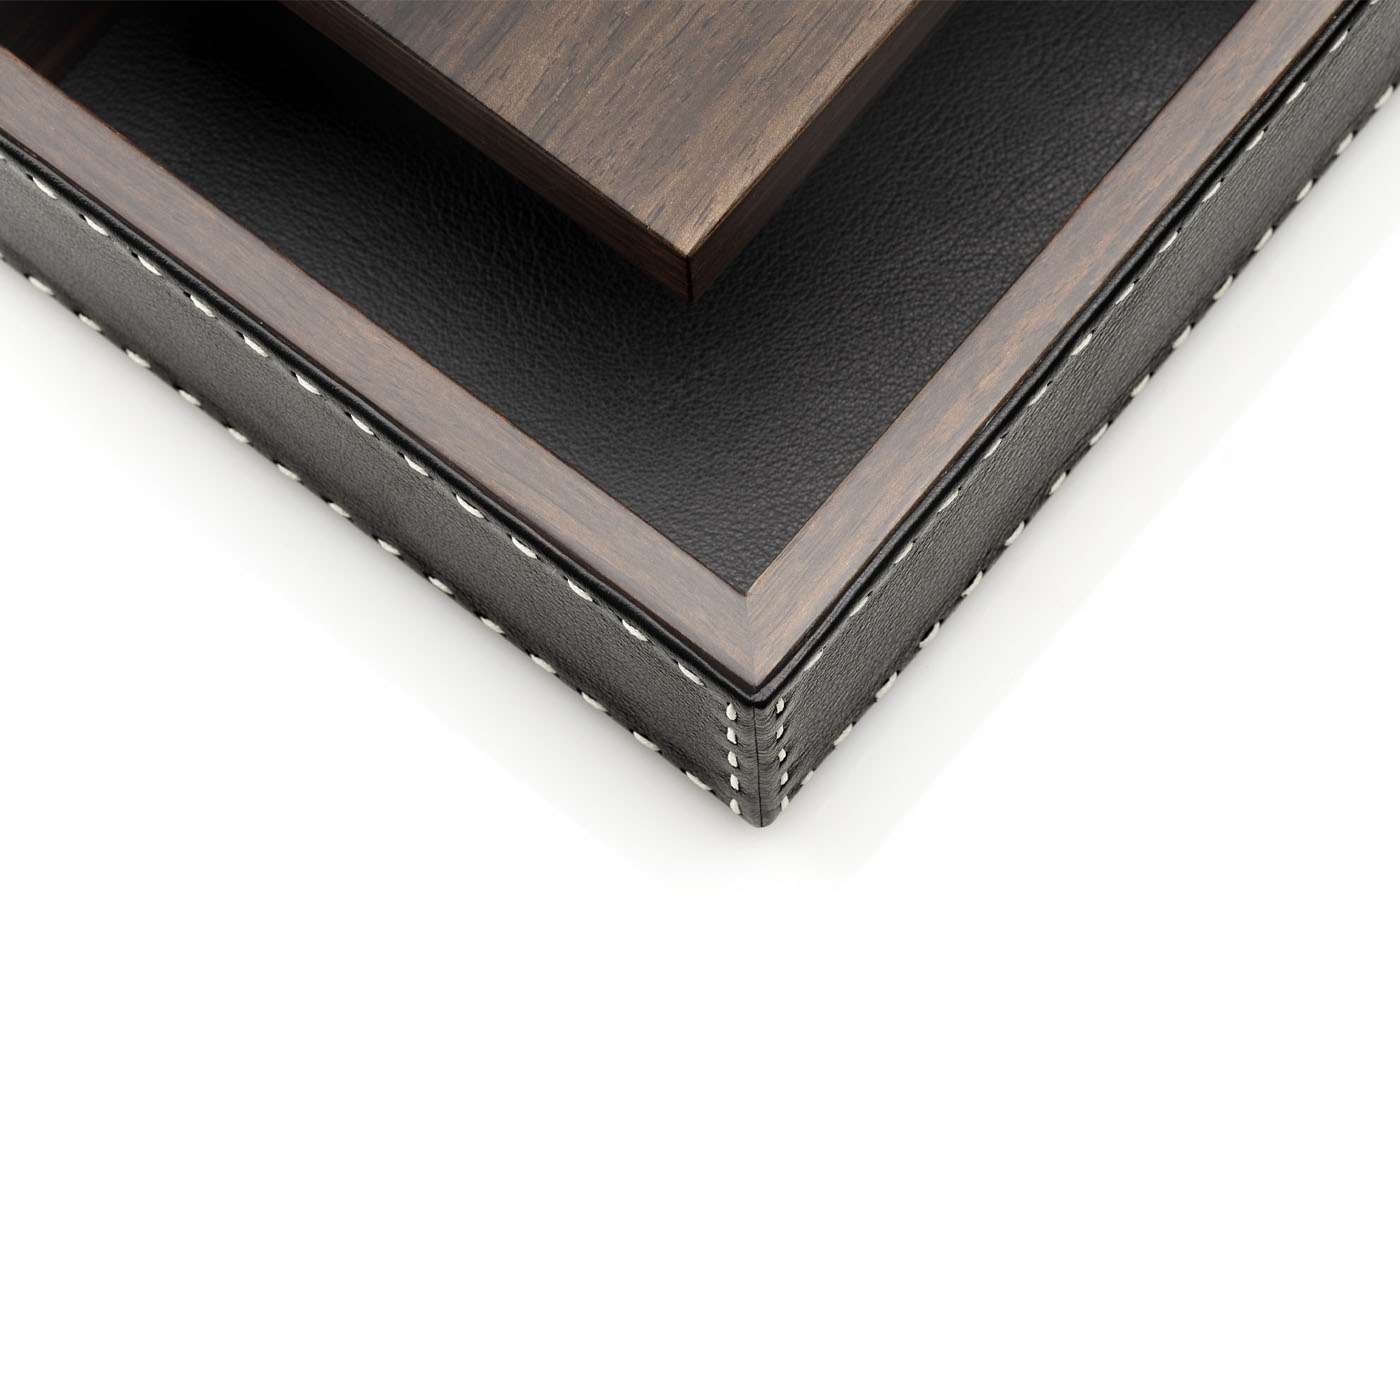 Picture frames and boxes - Capricia box in horn, leather and Amara ebony veneer - detail - Arcahorn